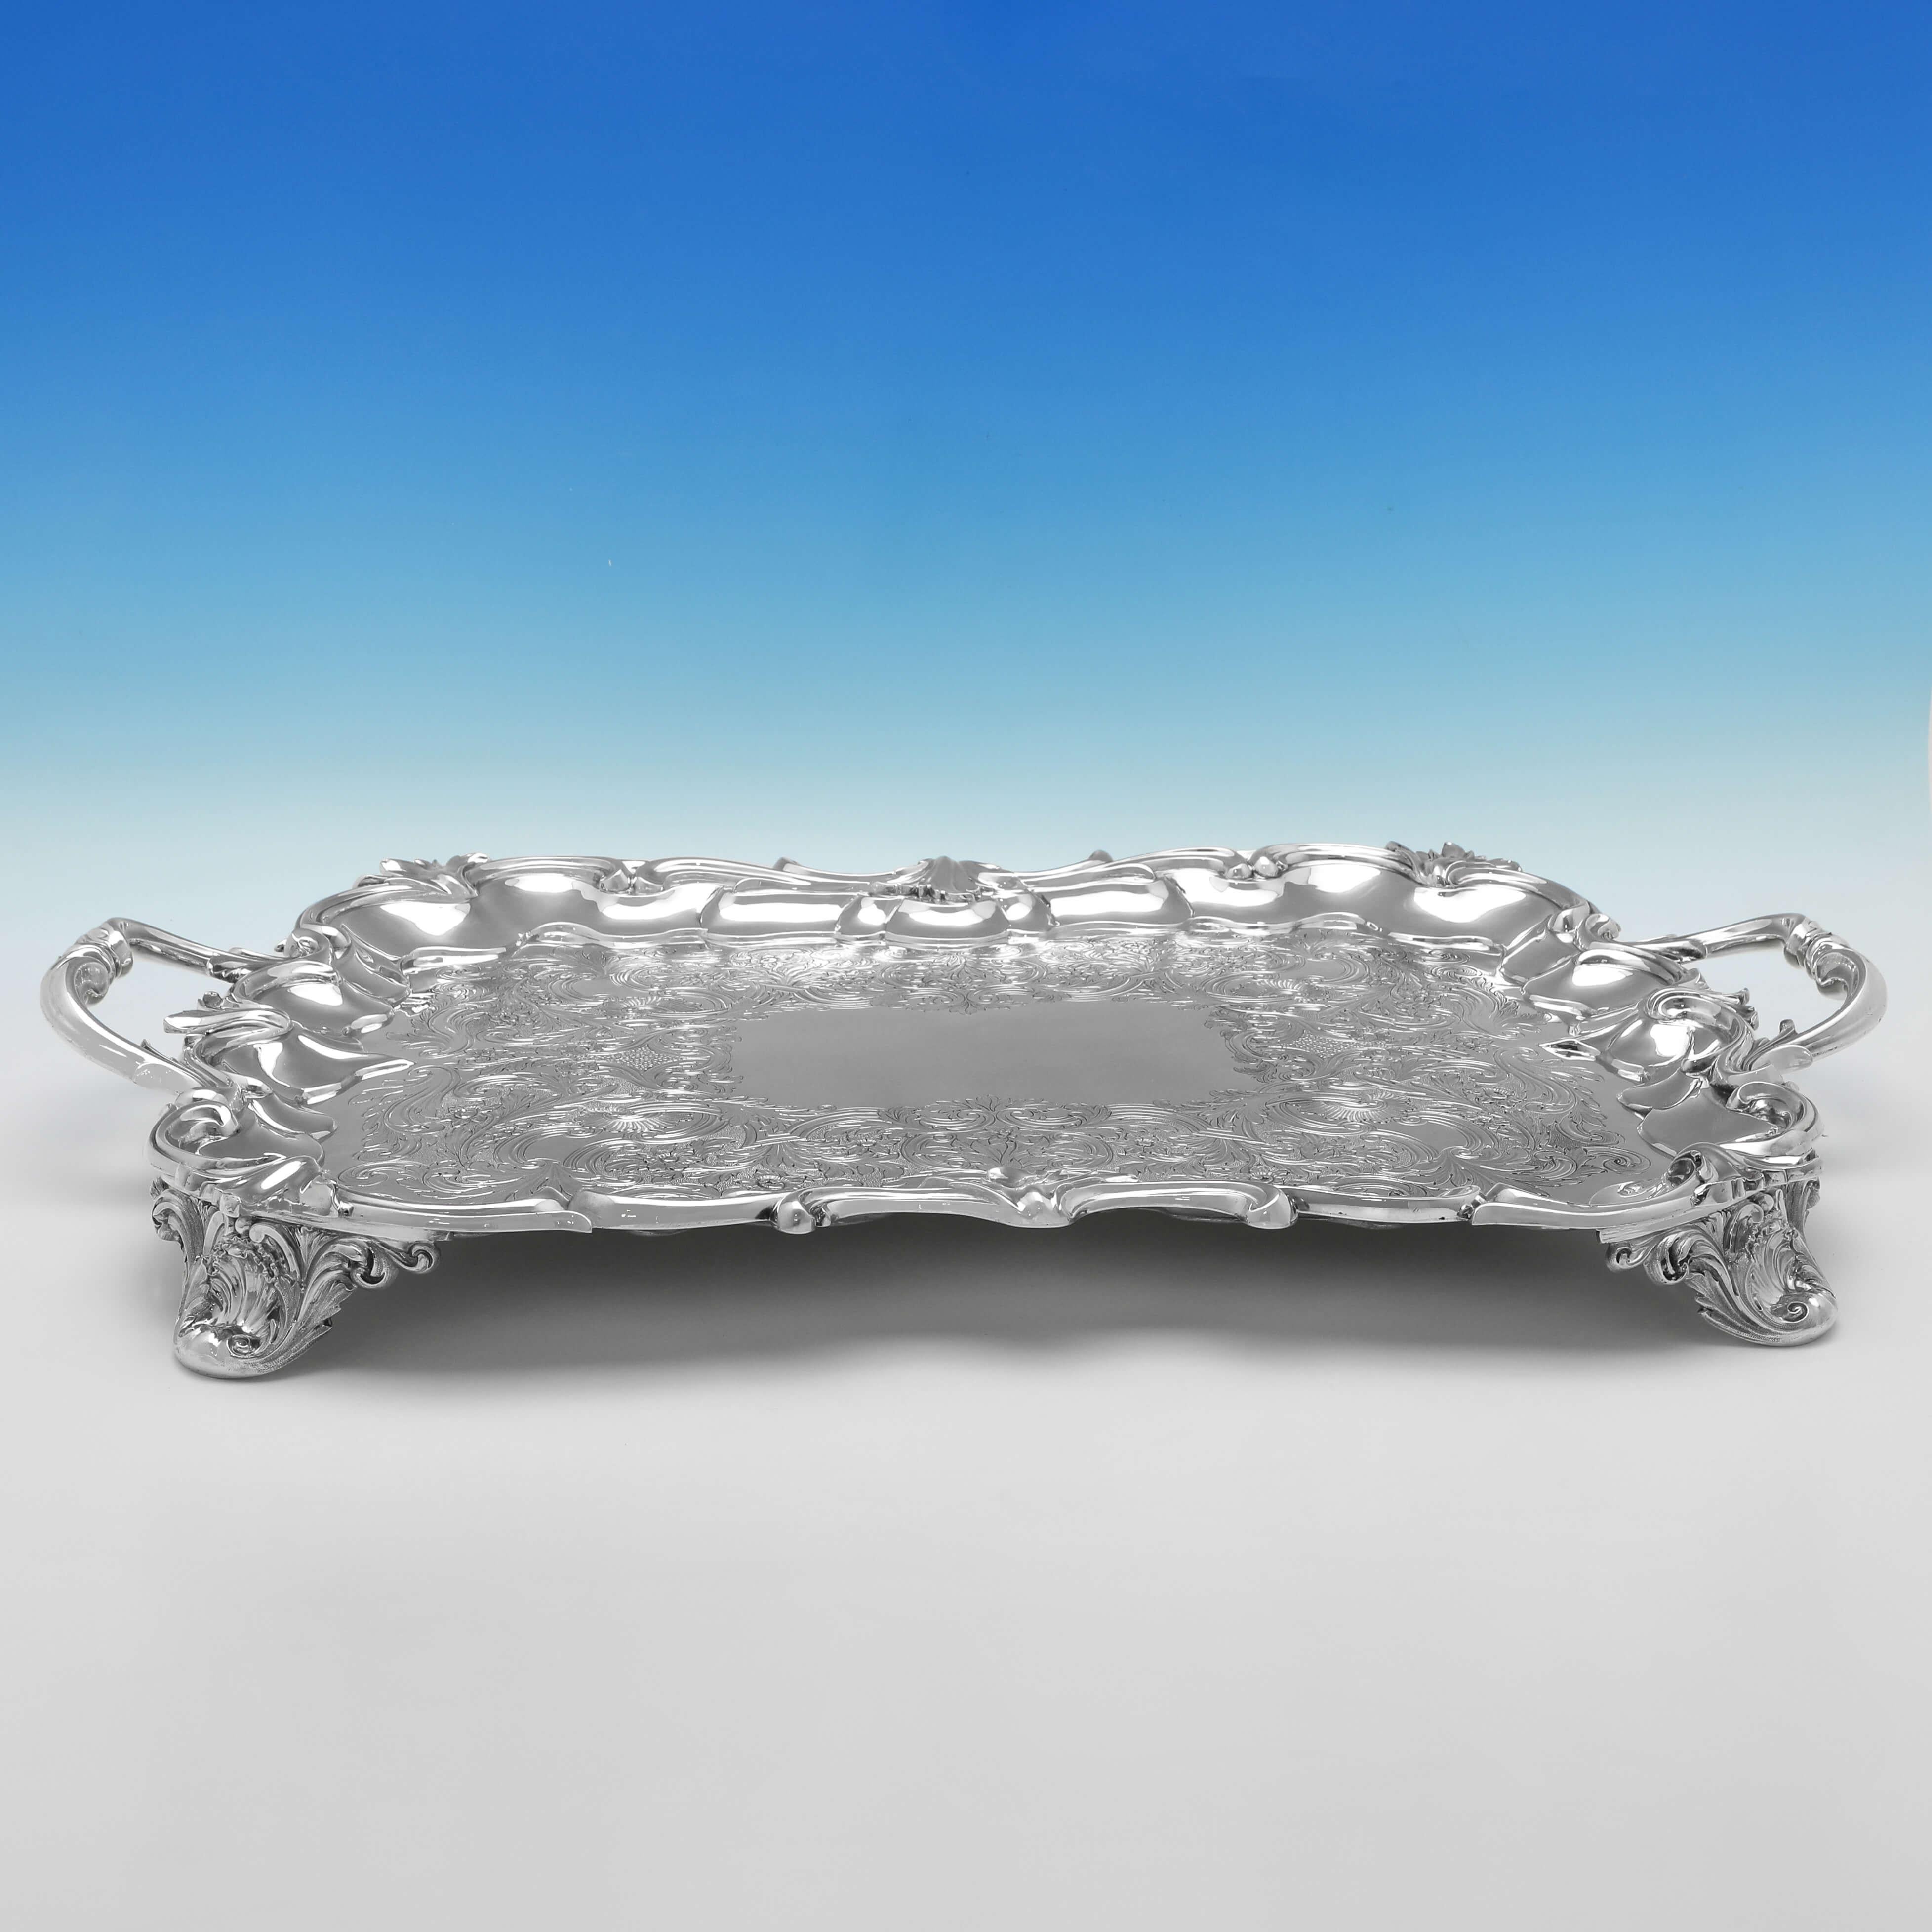 English Stunning & Large Victorian Sterling Silver Tray - Barnards 1838 For Sale